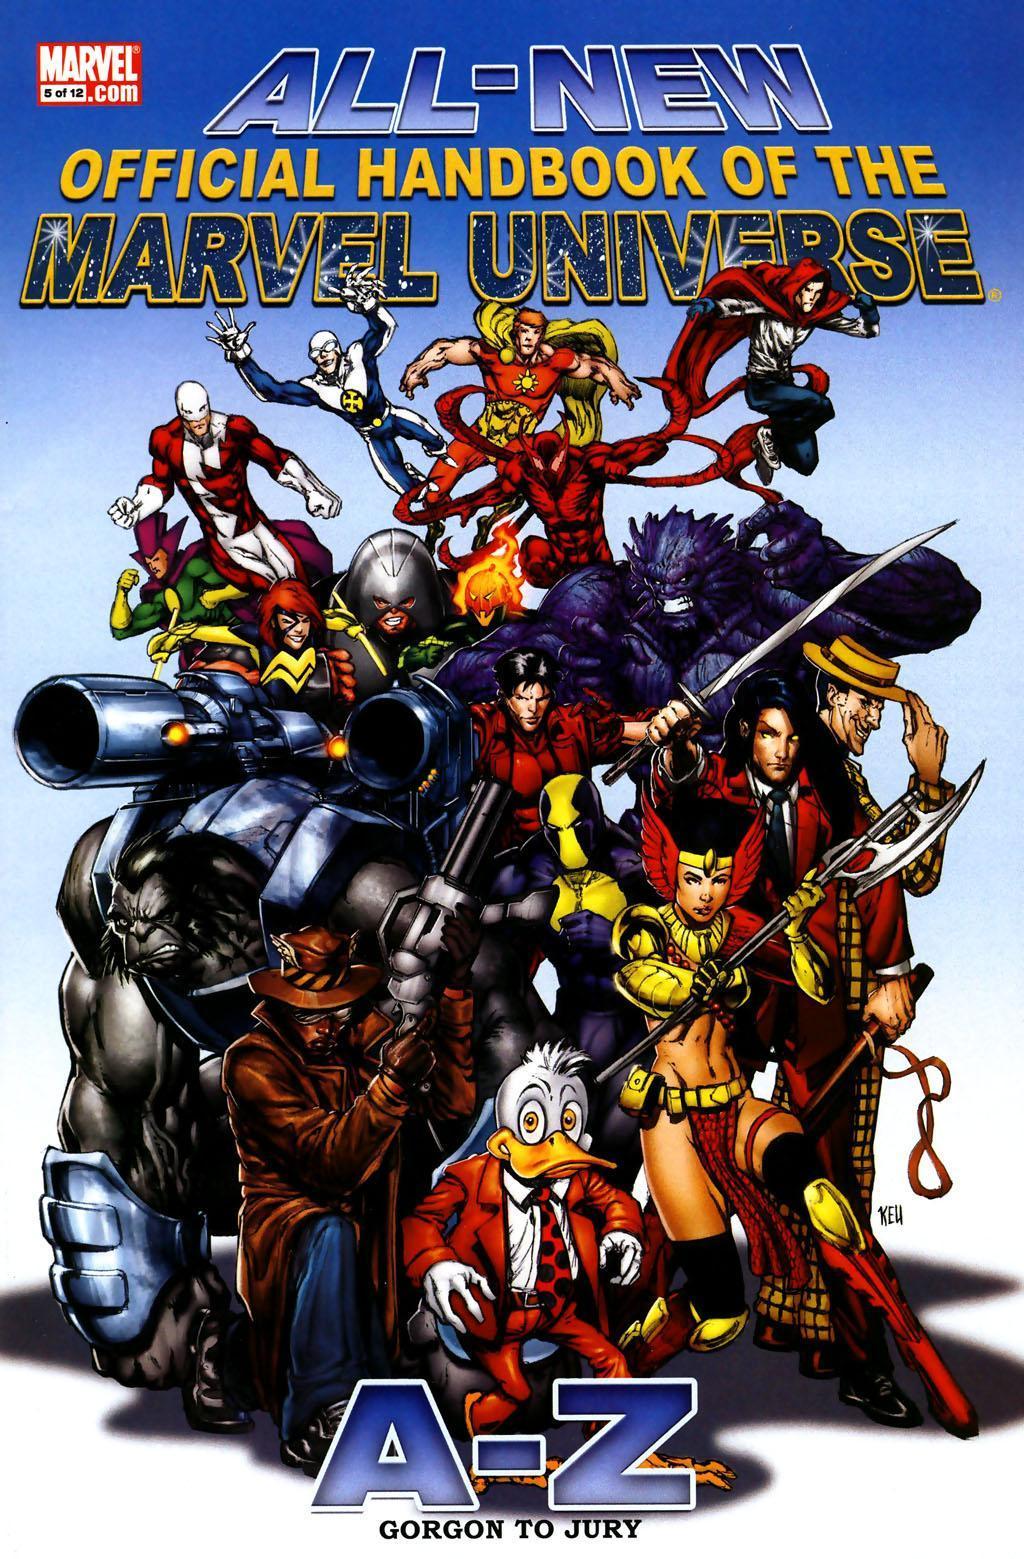 All-New Official Handbook of the Marvel Universe Vol. 1 #5